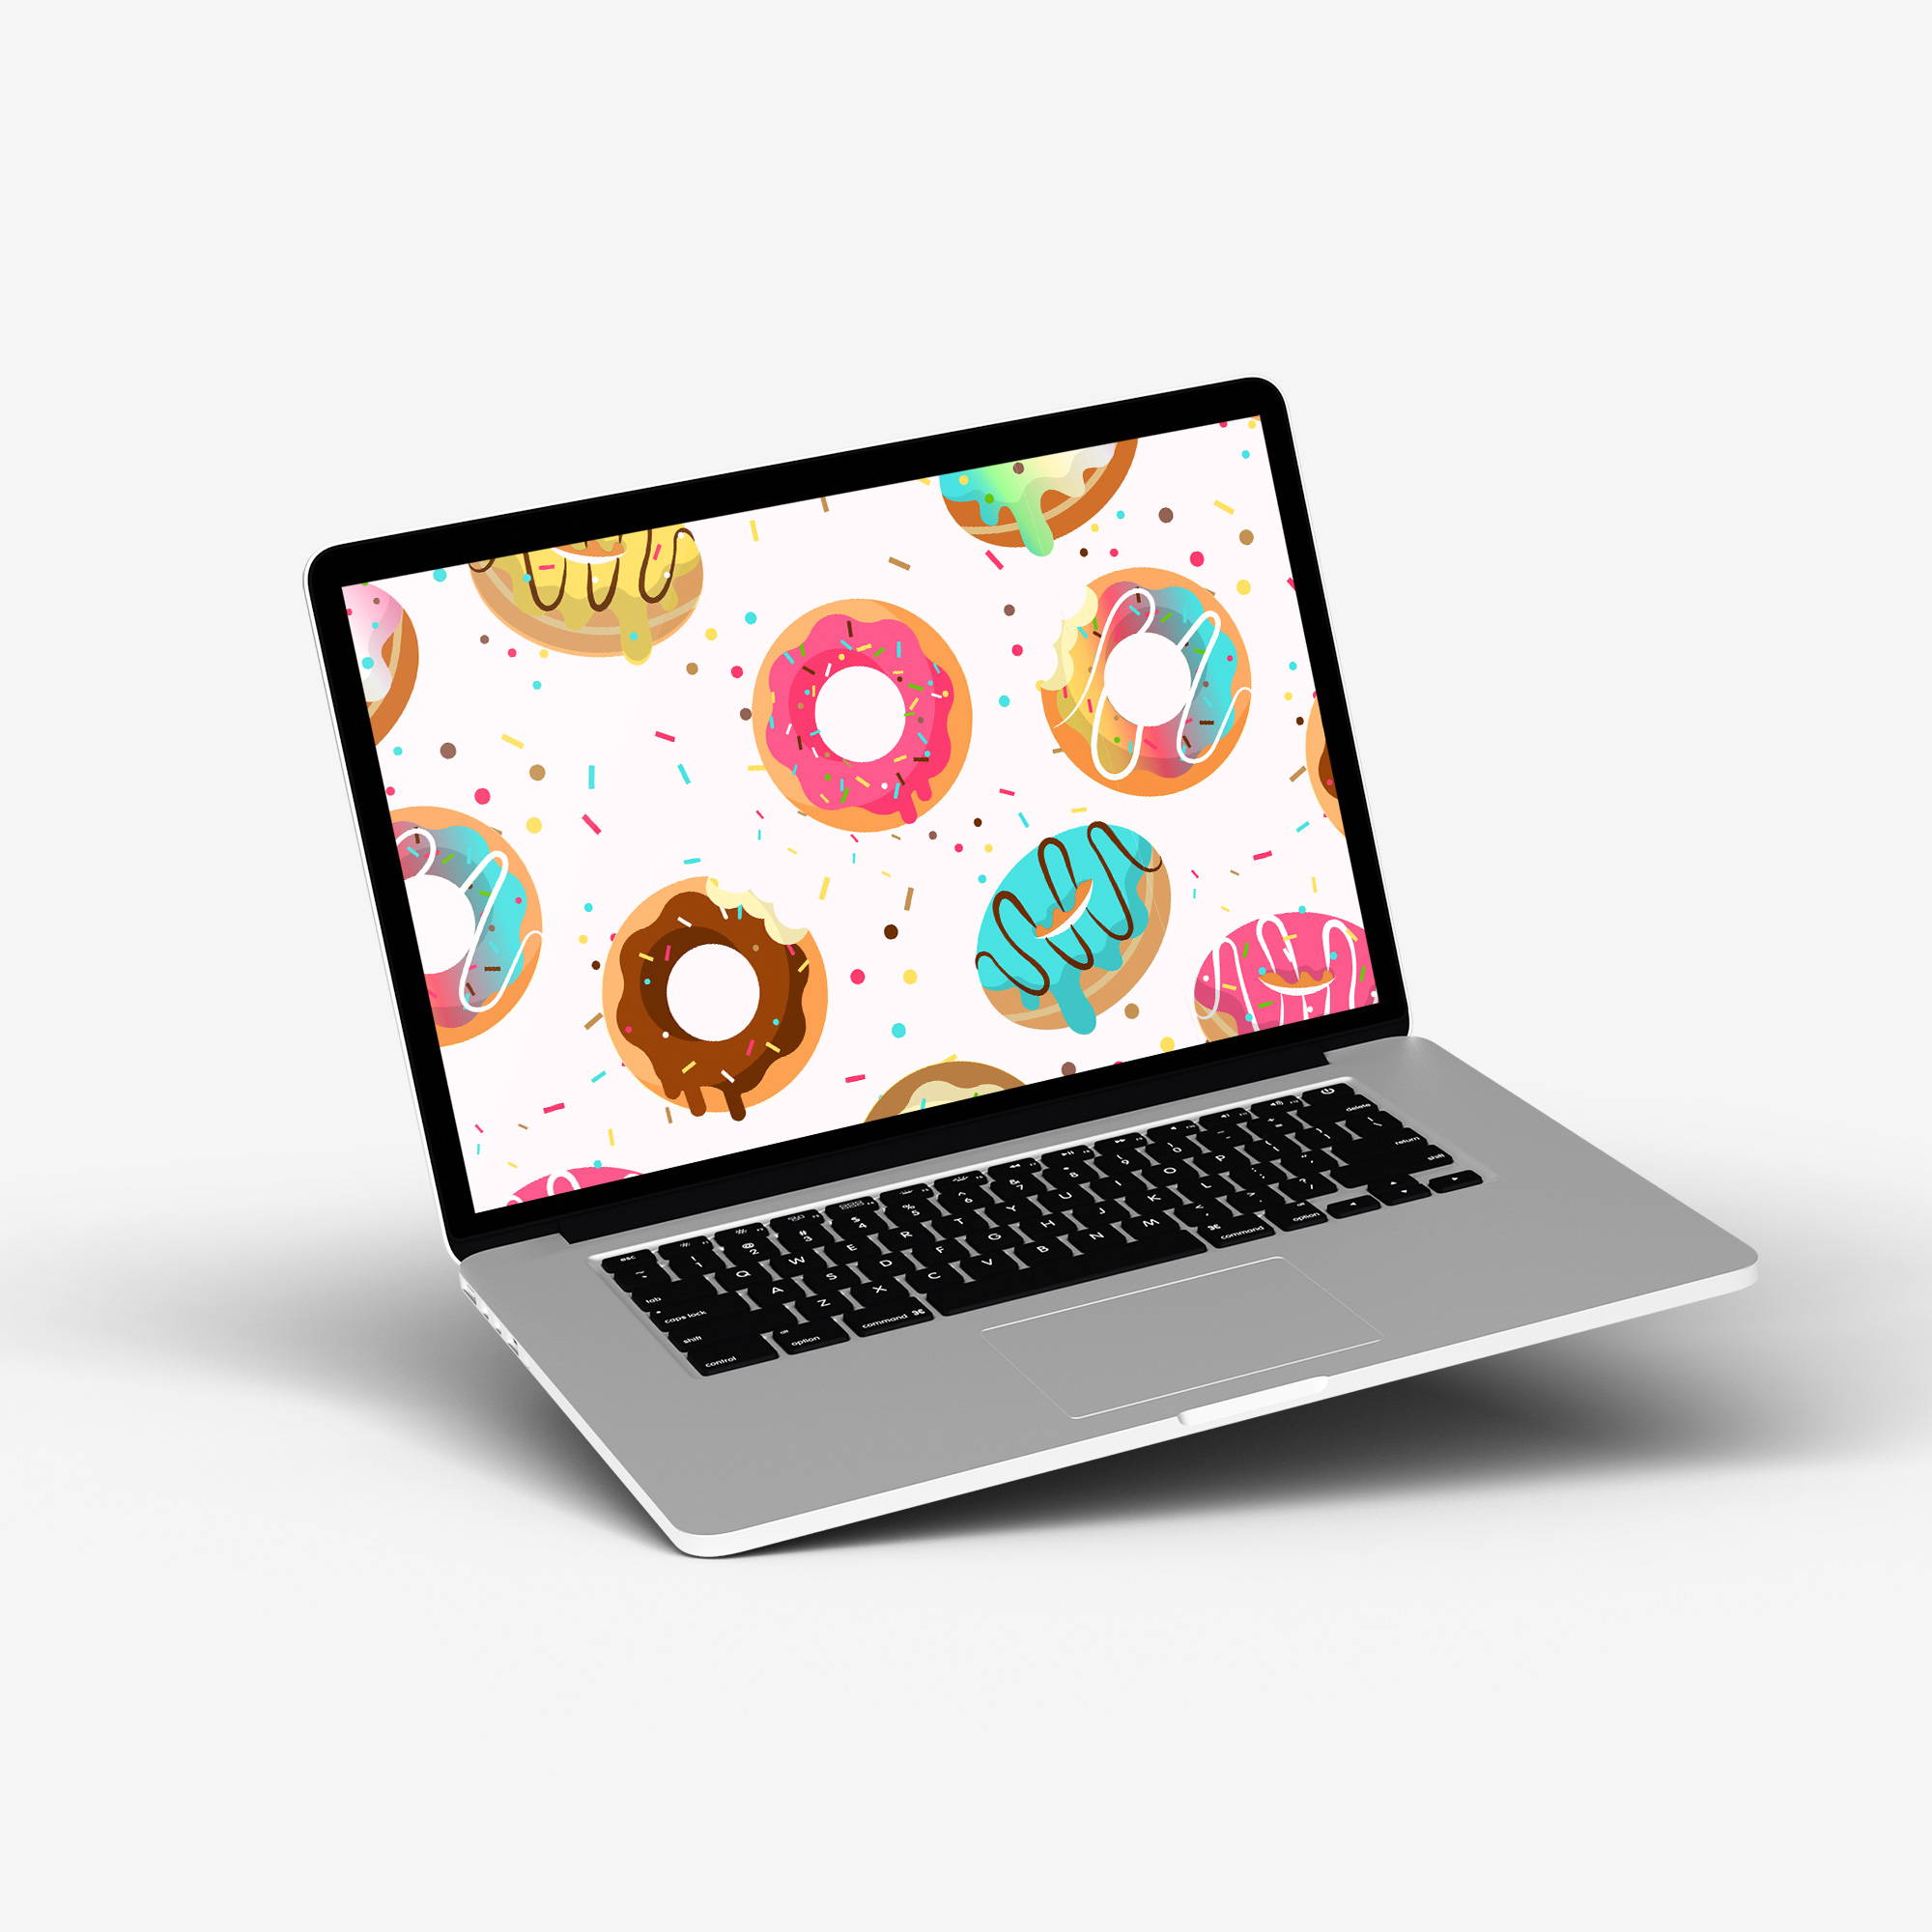 donut design as background for screens 439